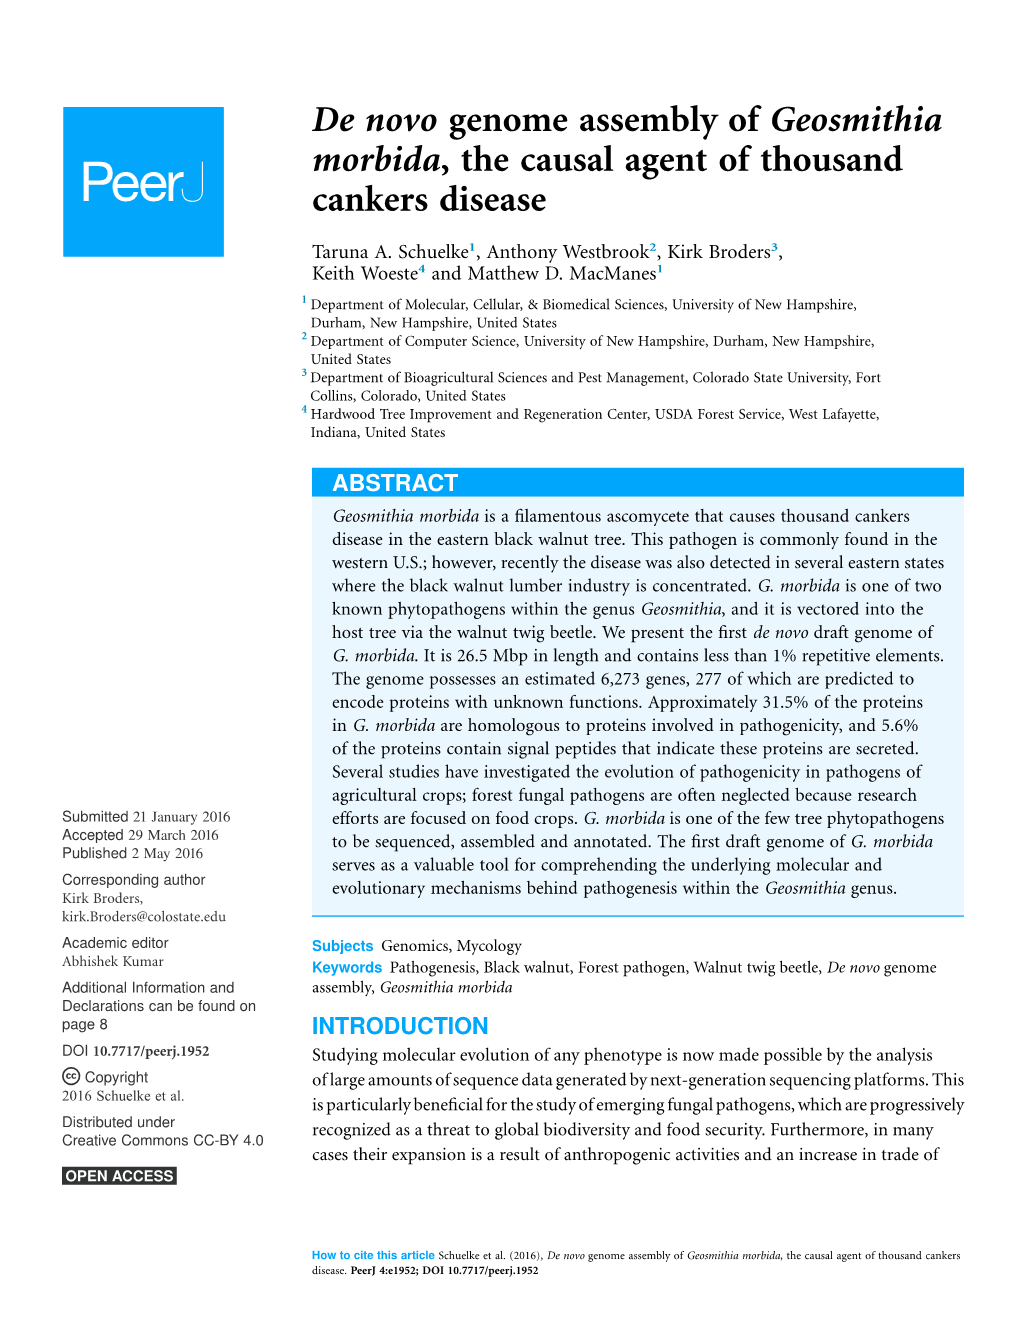 De Novo Genome Assembly of Geosmithia Morbida, the Causal Agent of Thousand Cankers Disease